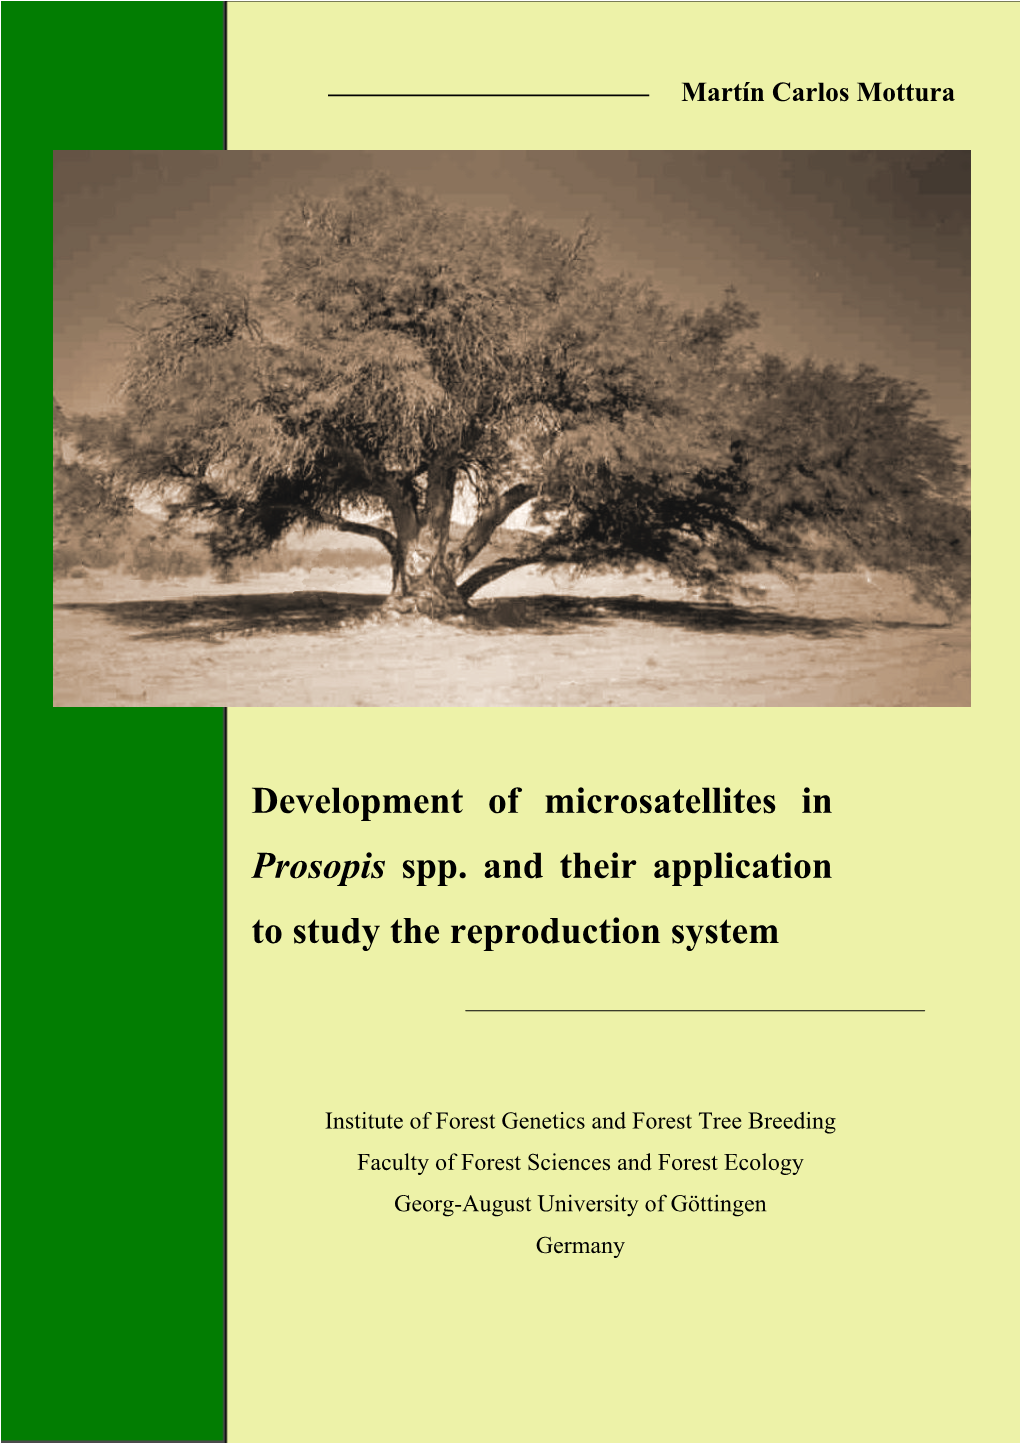 Development of Microsatellites in Prosopis Spp. and Their Application to Study the Reproduction System